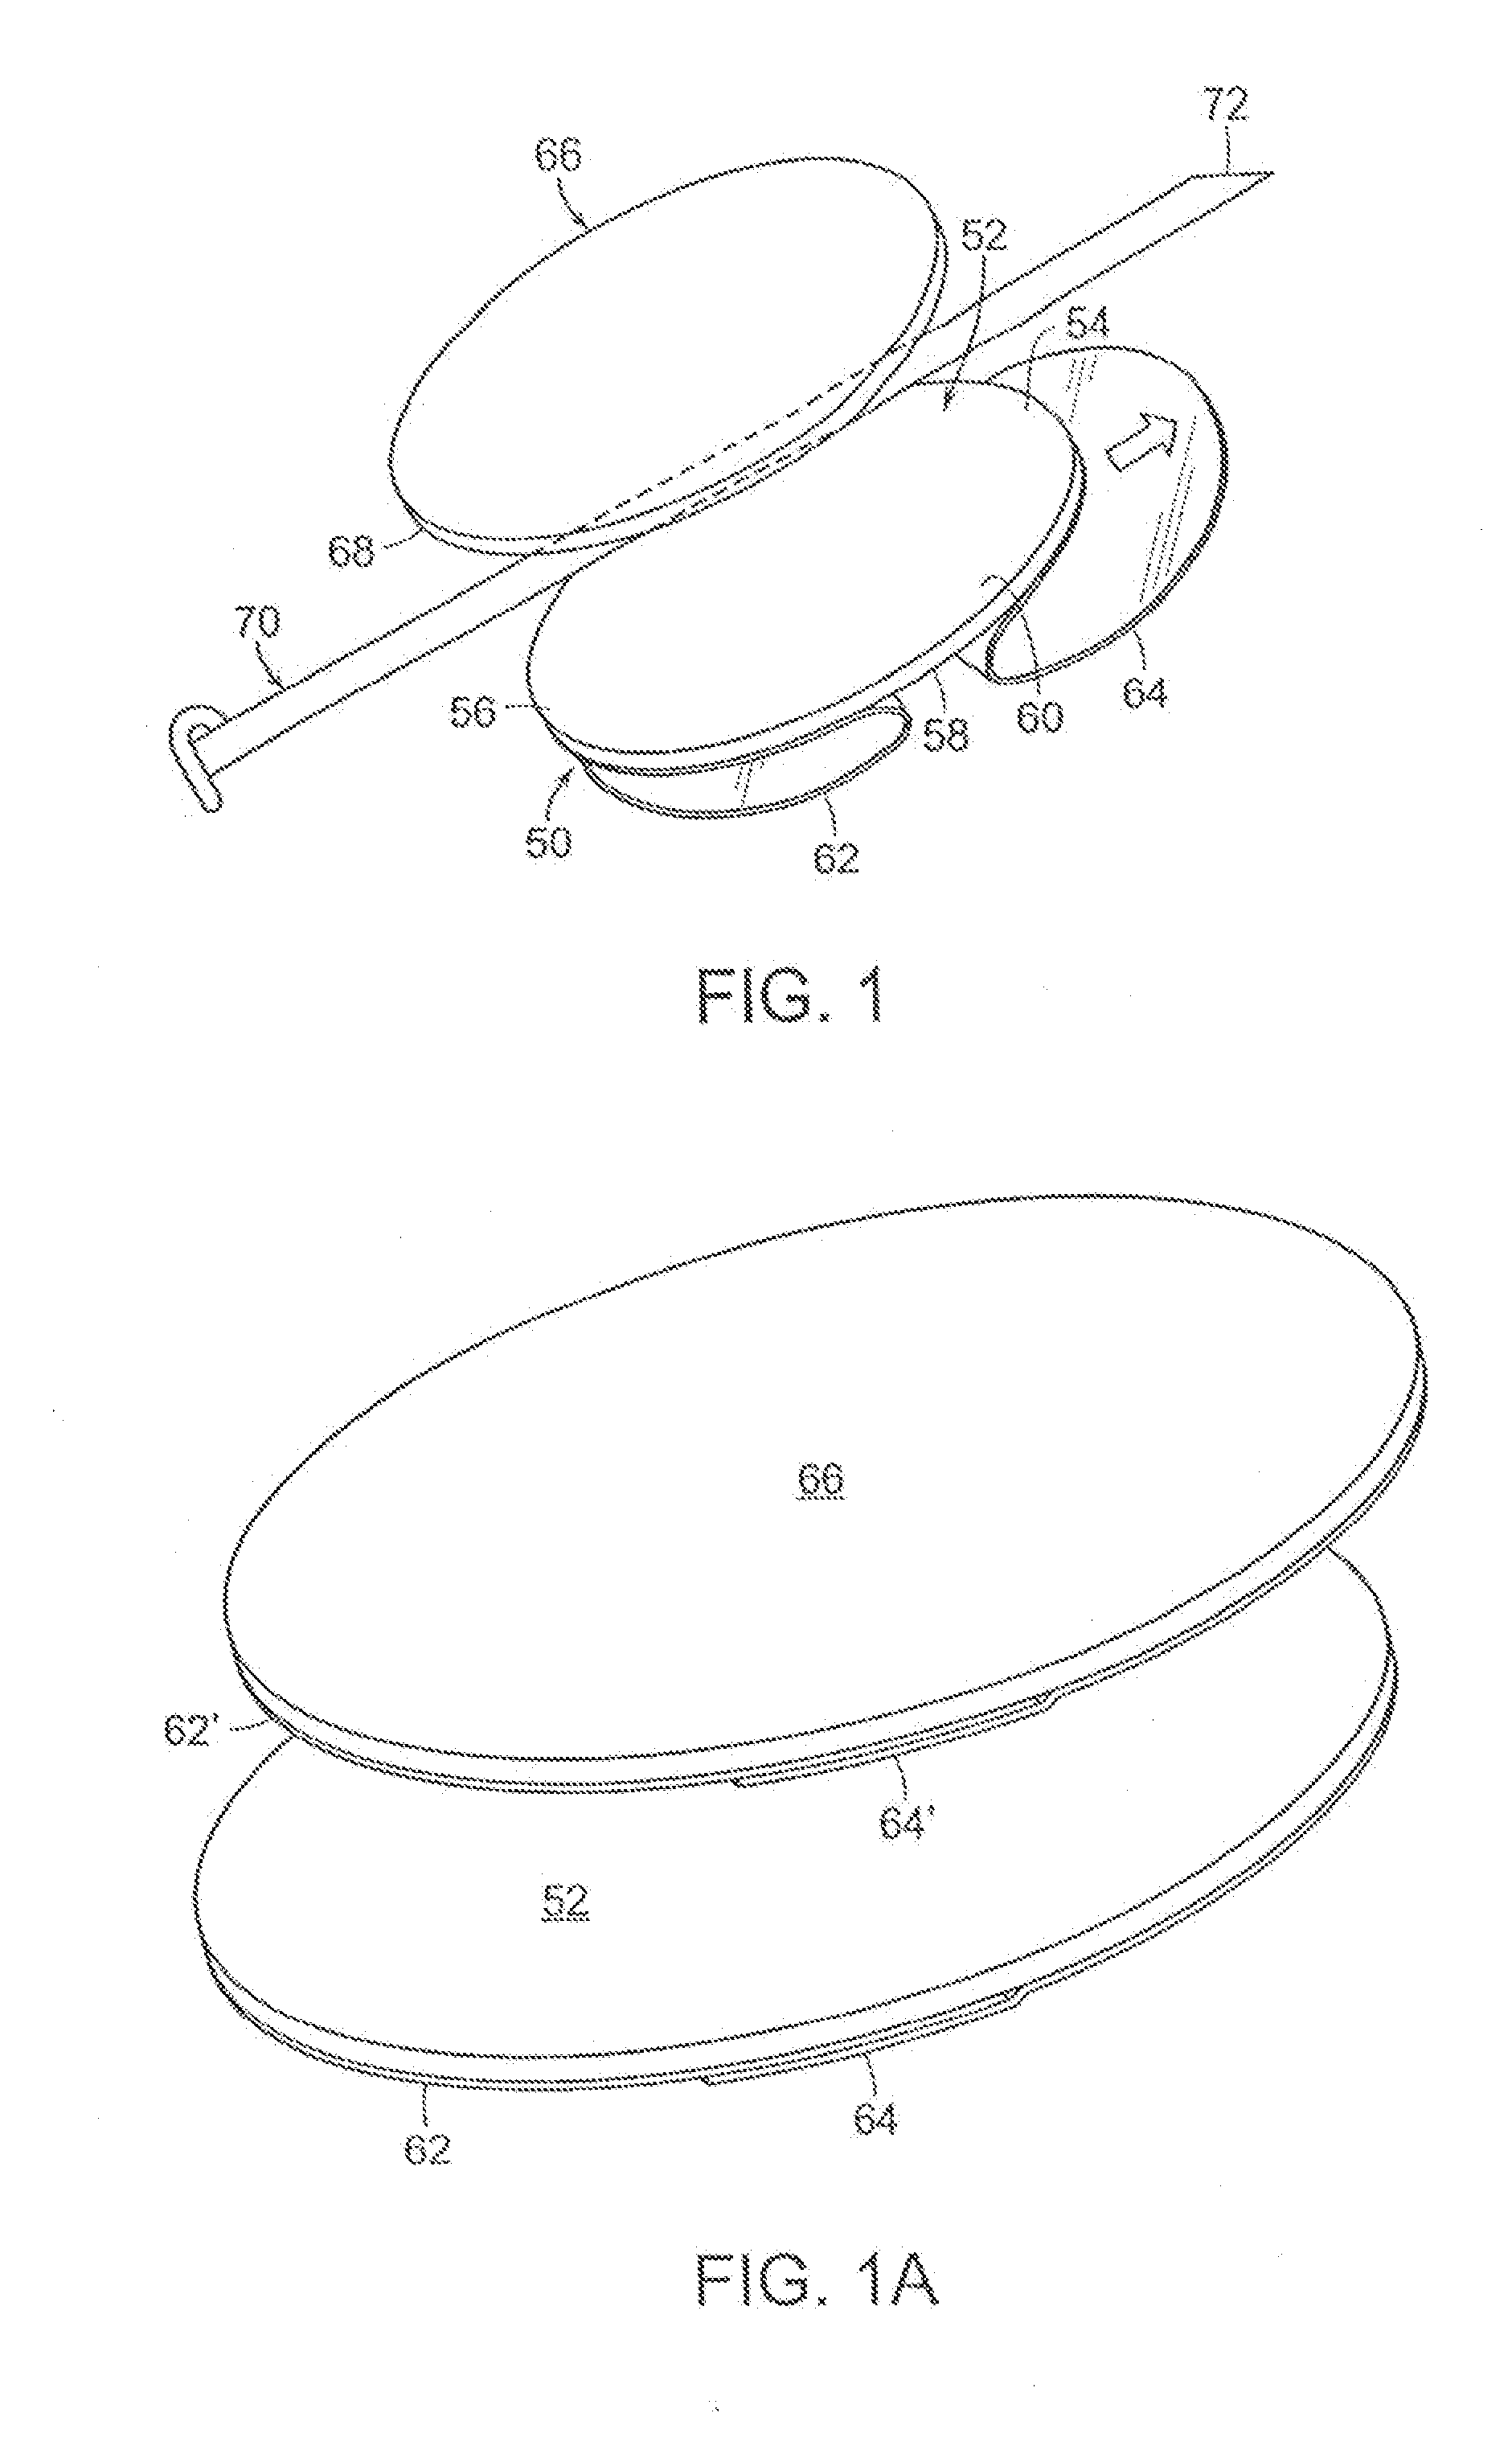 Adhesive layer arrangements and methods for securing medical tubing